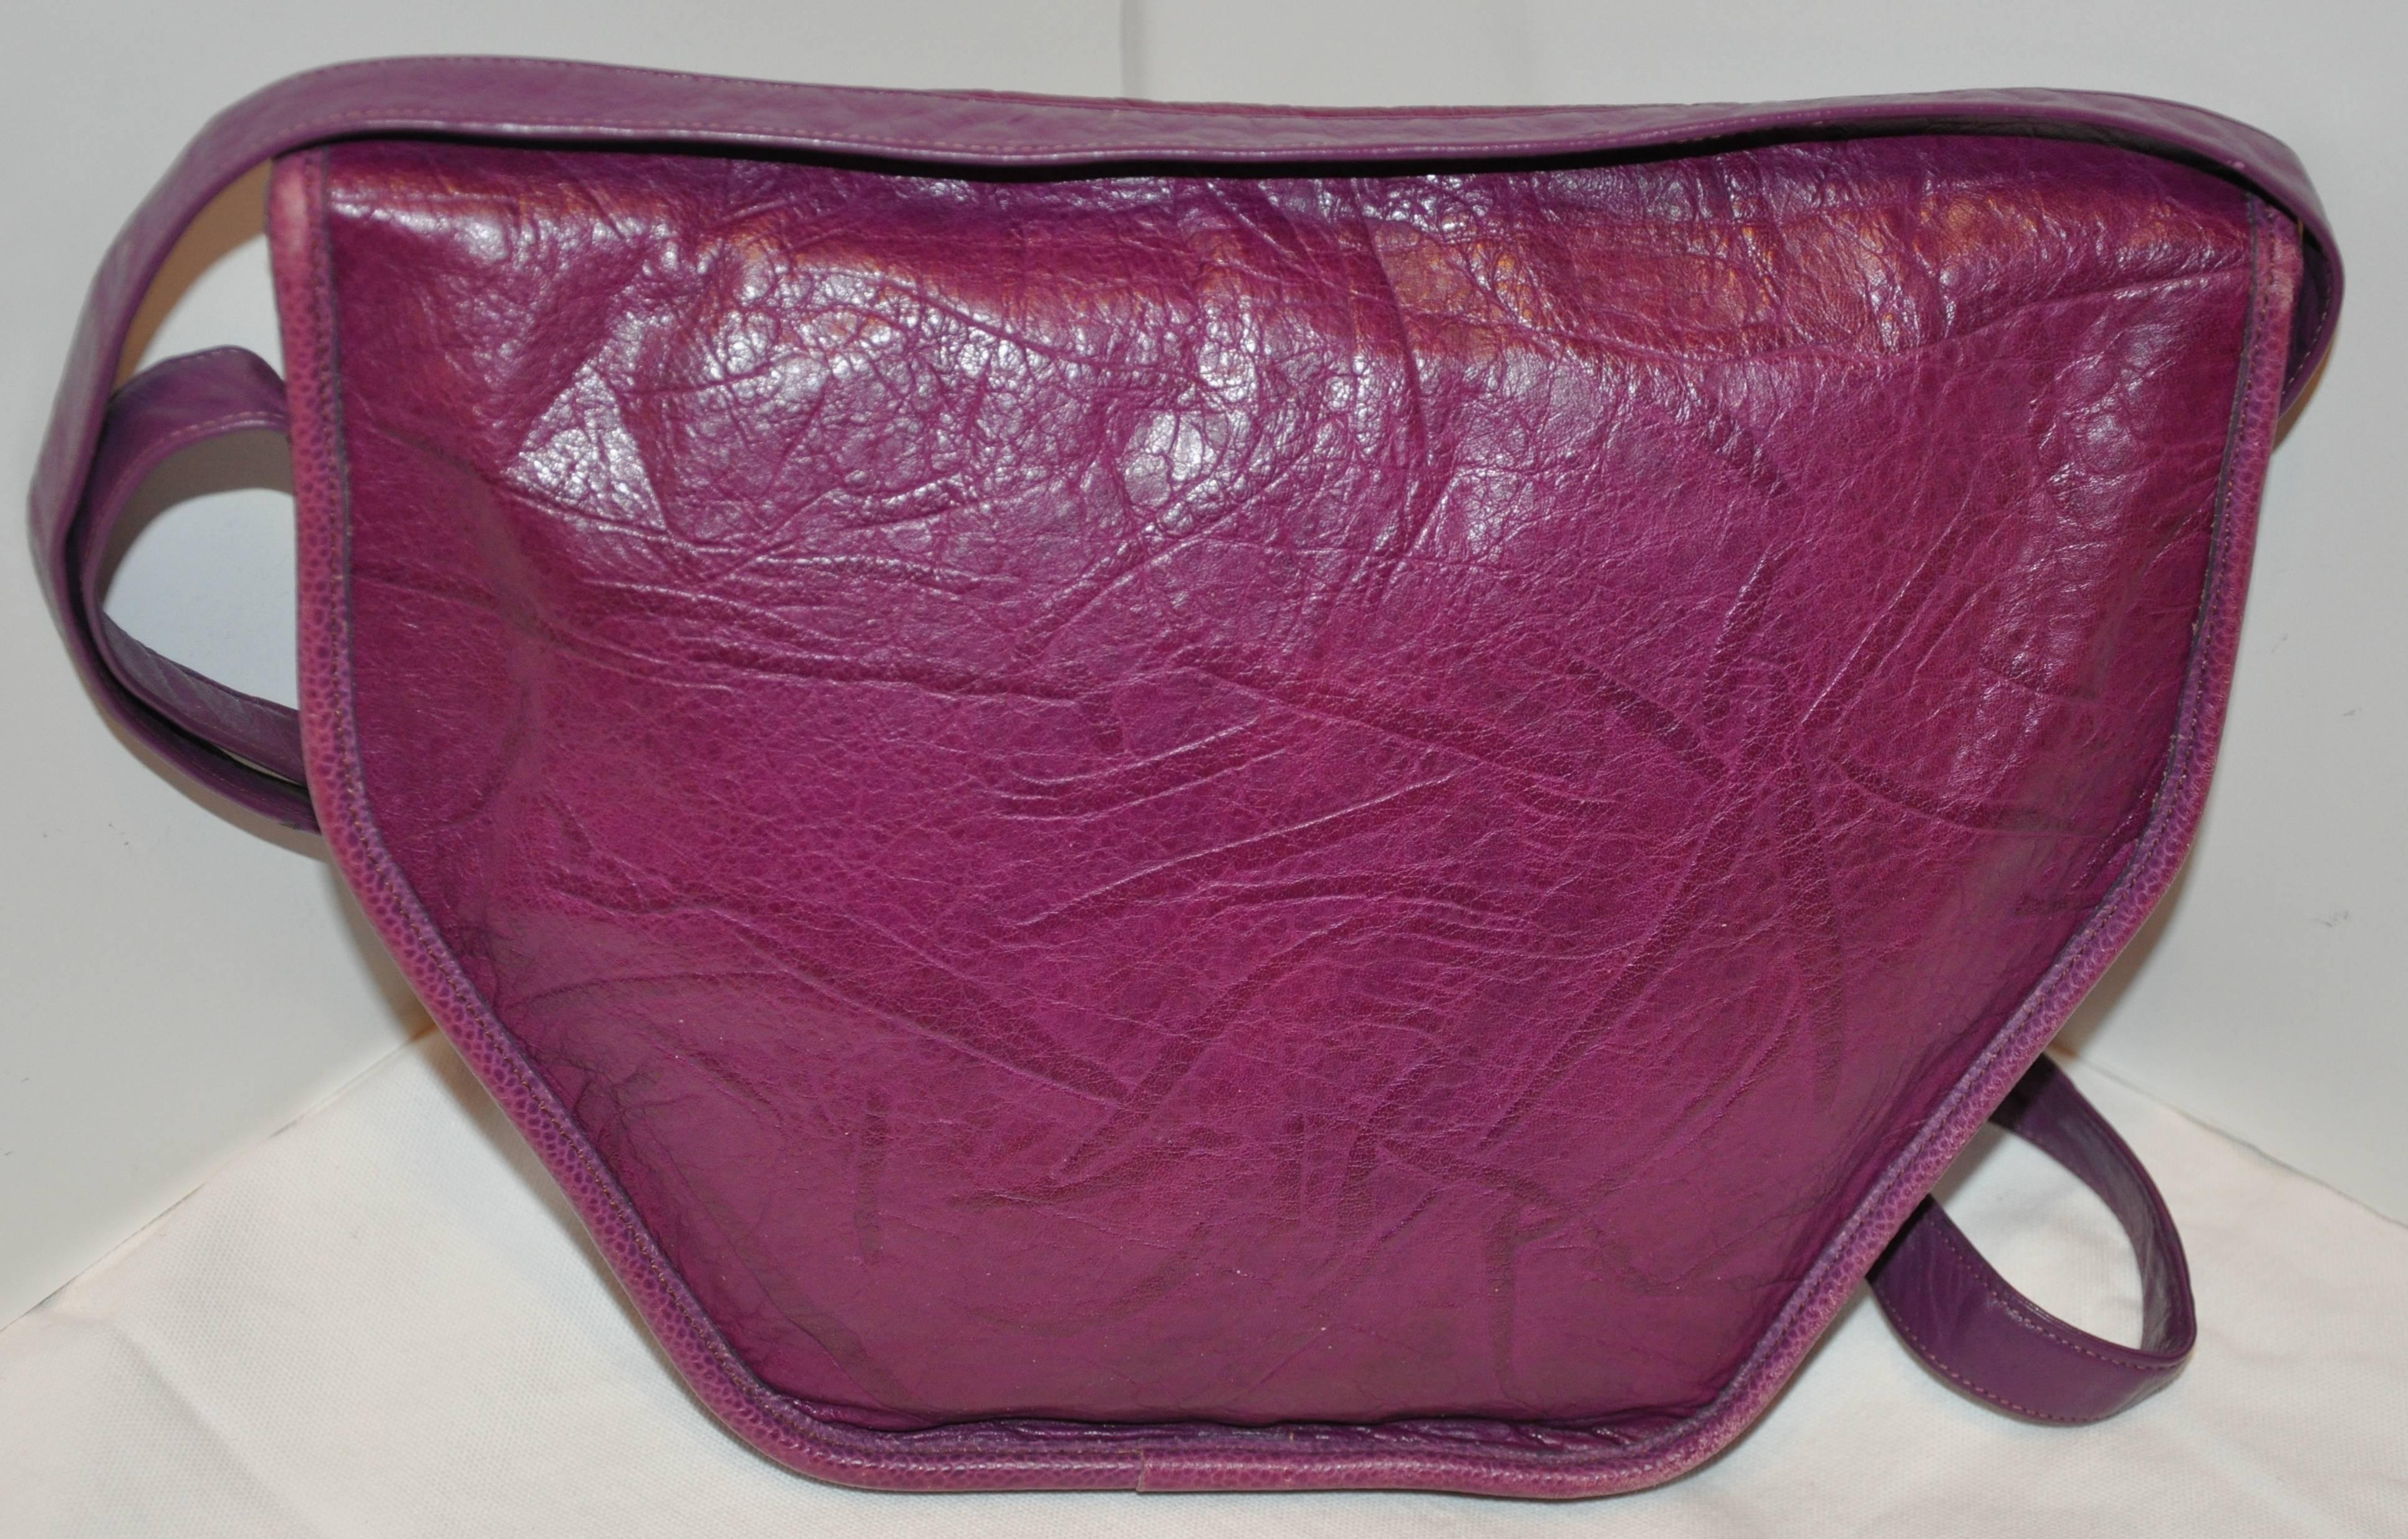        Carlos Falchi wonderful textured violet buffalo shoulder bag is detailed with their signature name logo embossed on the exterior front flap accented with embossed alligators and snakes surrounding the signature name. There are, as well their